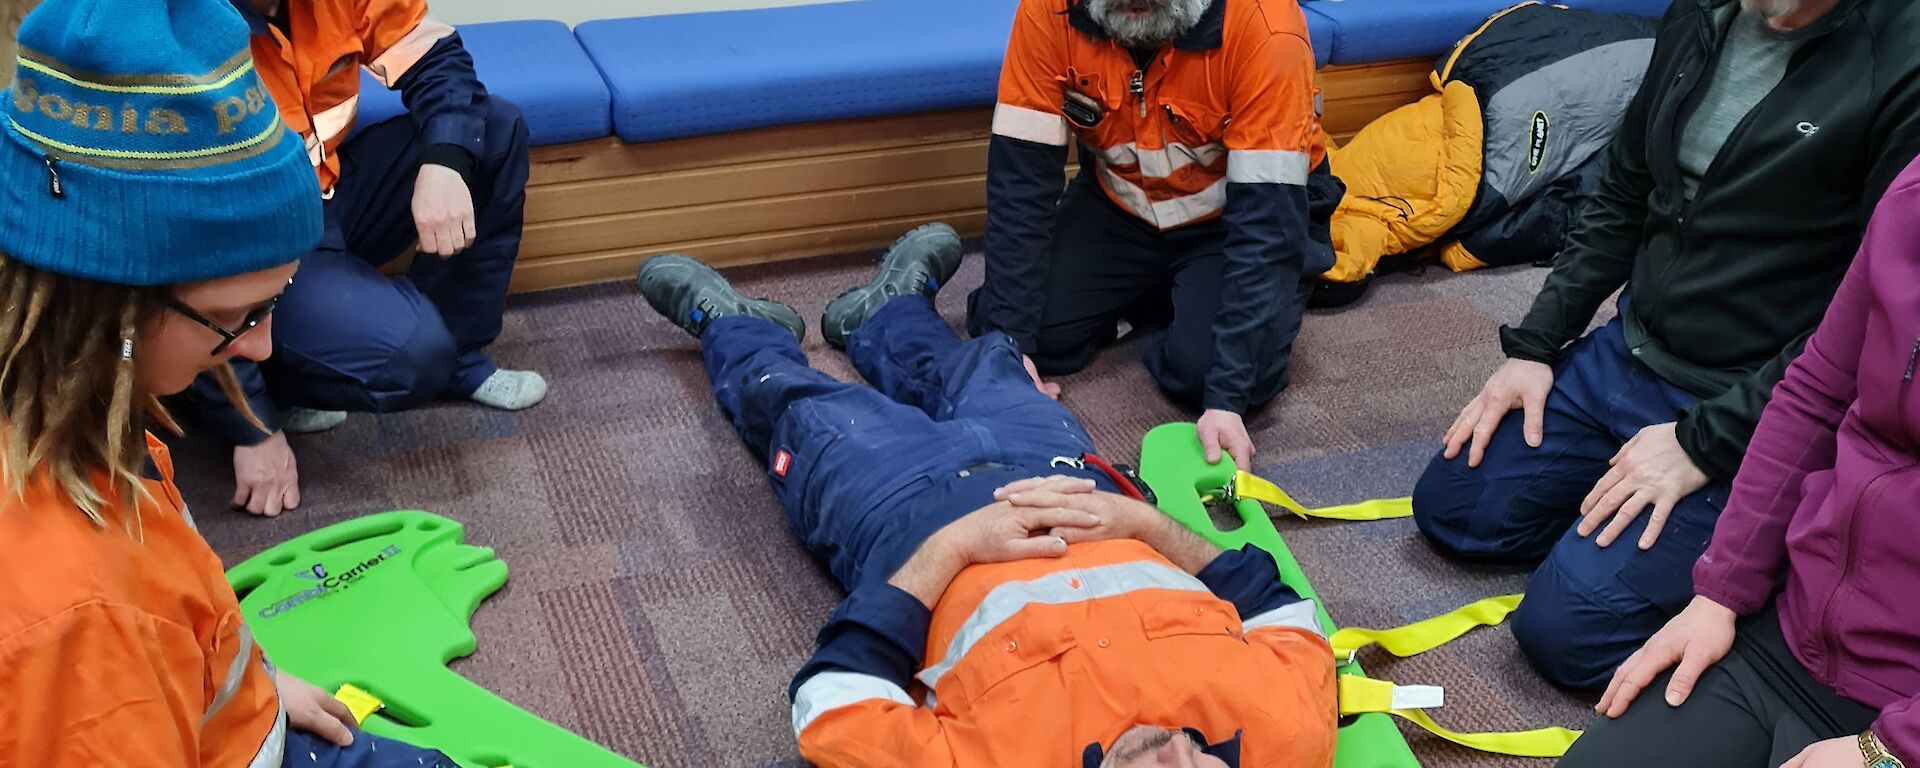 An expeditioner laying on the floor with a green split stretcher about to be slid under him by the five people kneeling around him.